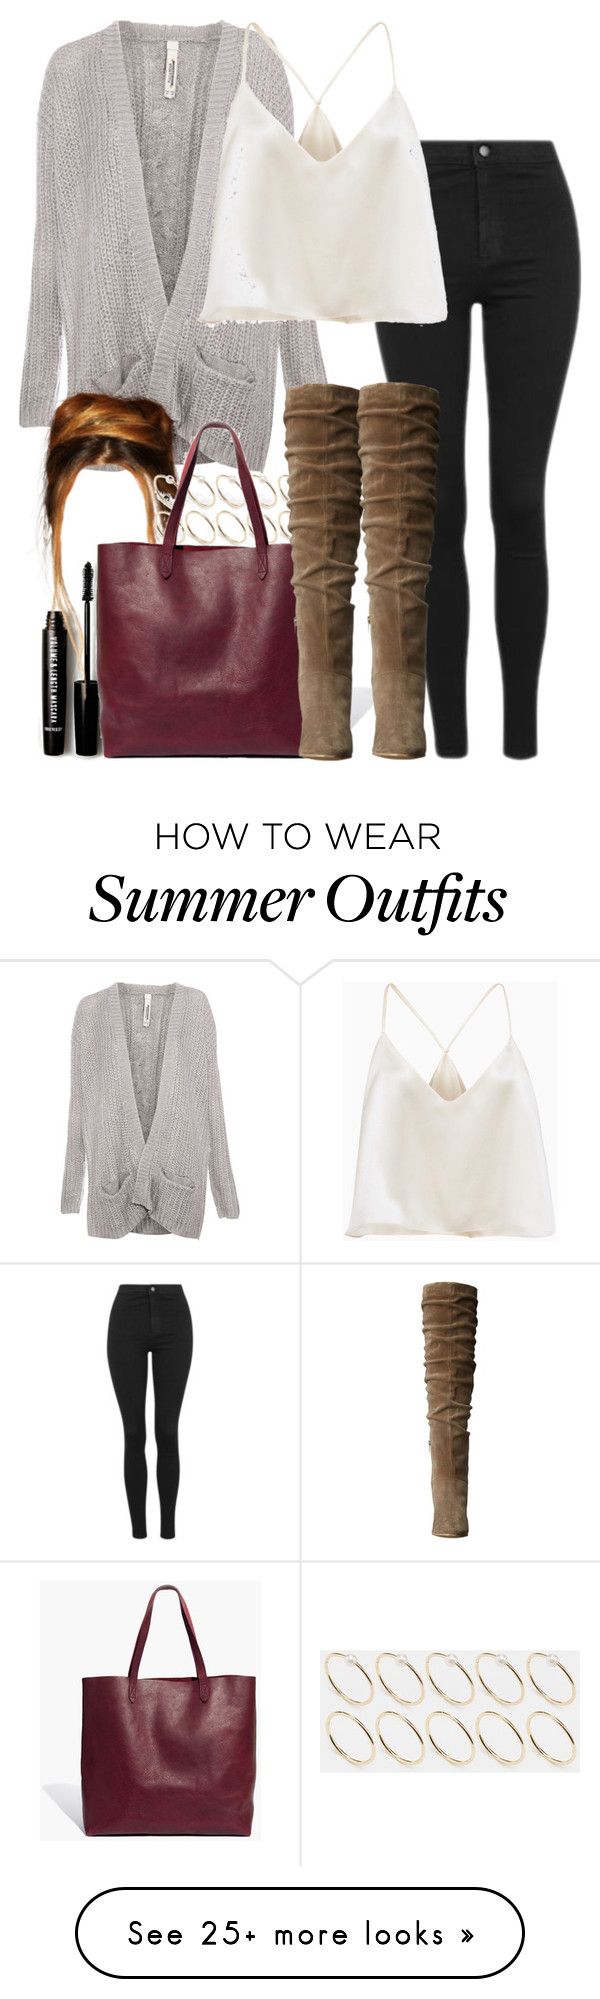 "Caroline inspired fall school outfit" by tvdstyleblog on Polyvore fea...